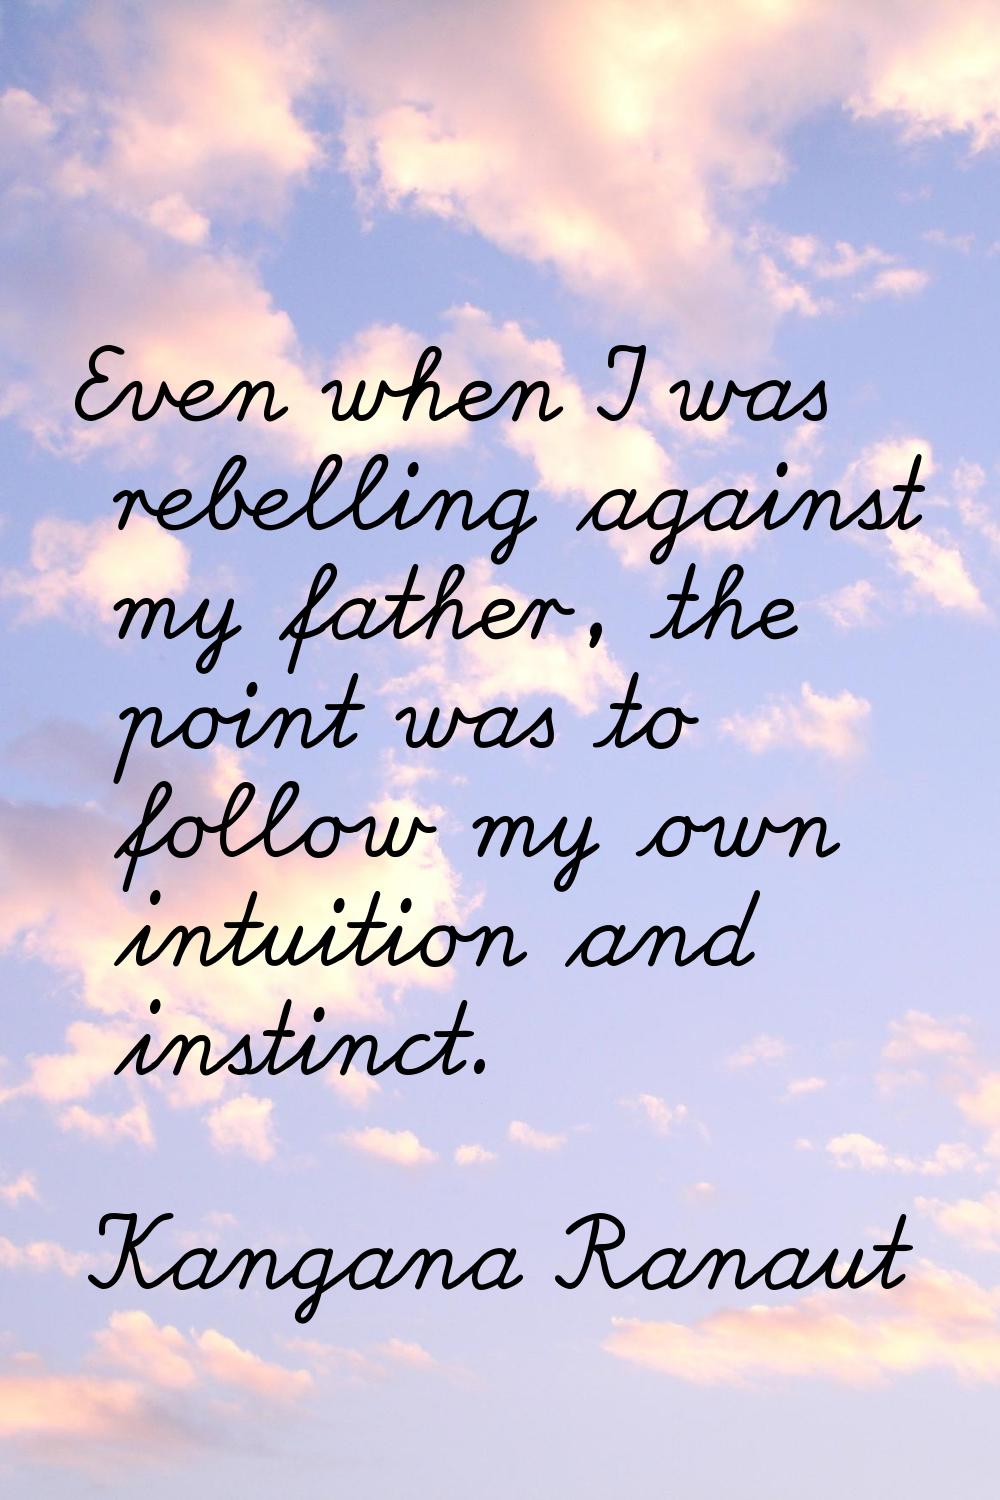 Even when I was rebelling against my father, the point was to follow my own intuition and instinct.